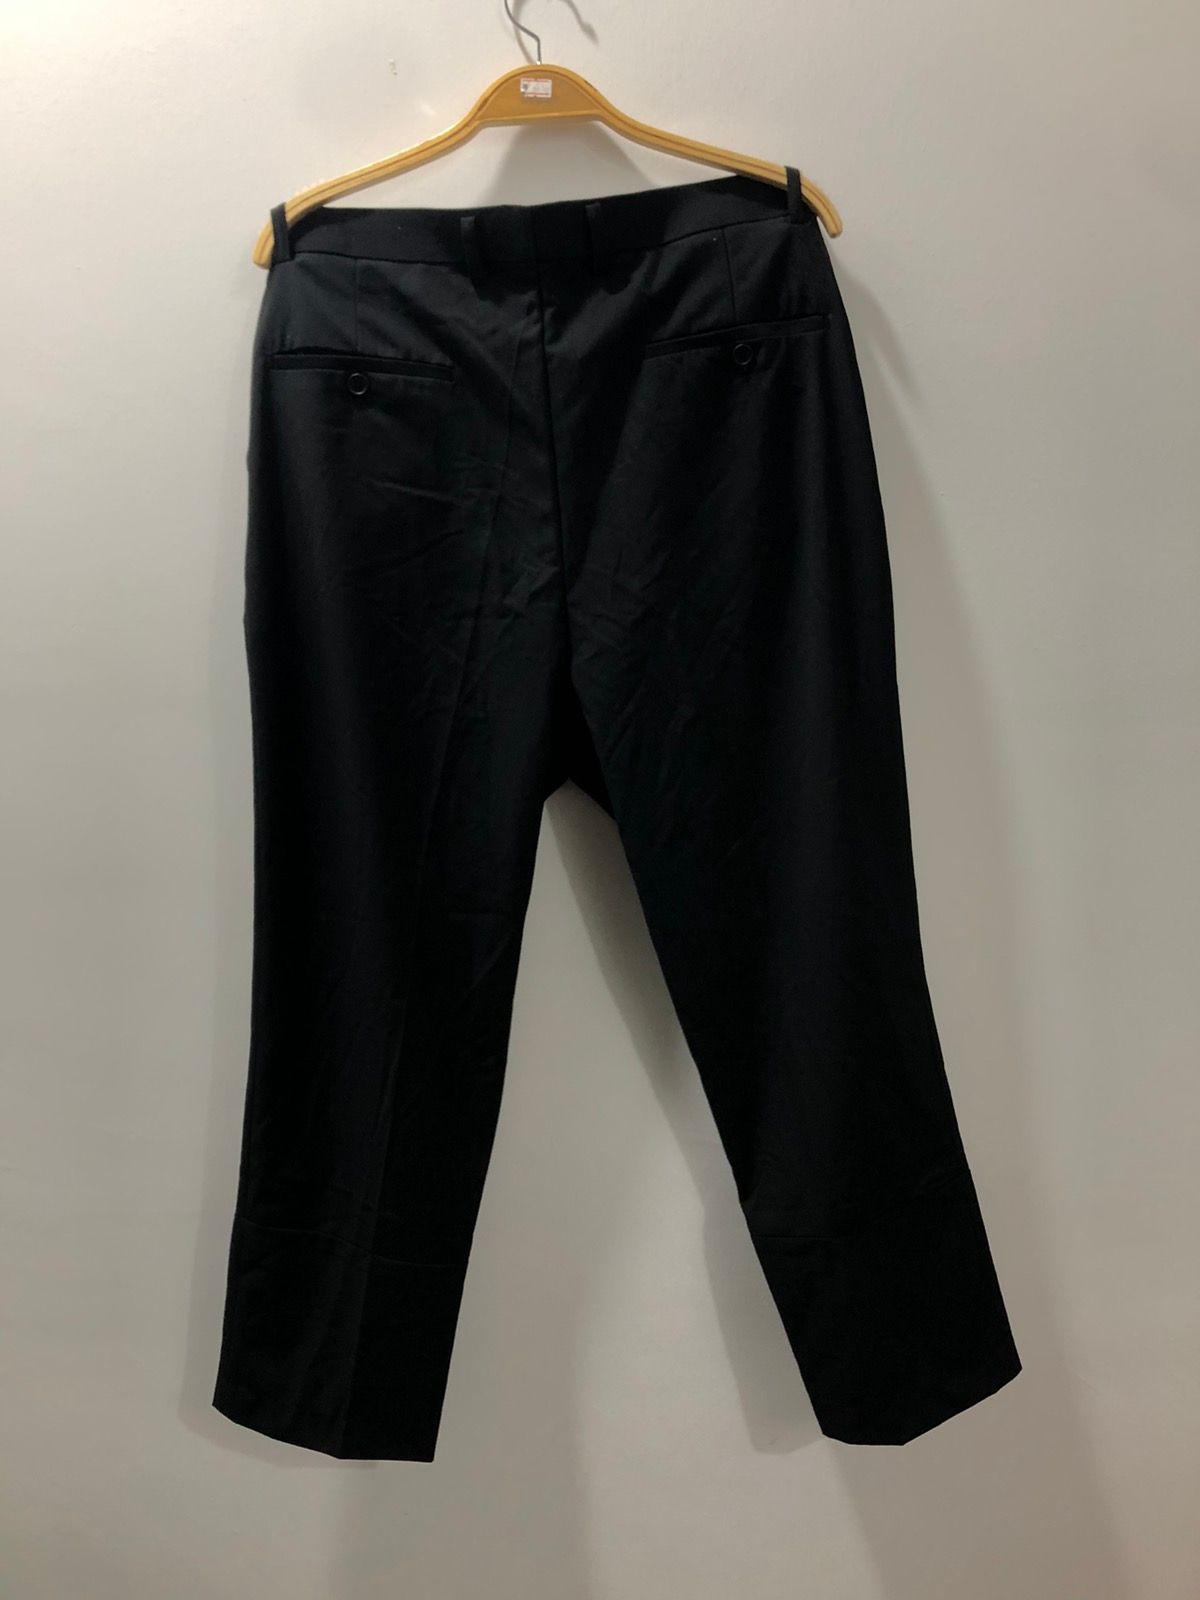 SS14 Acne Studios Casual Office Pant - 9